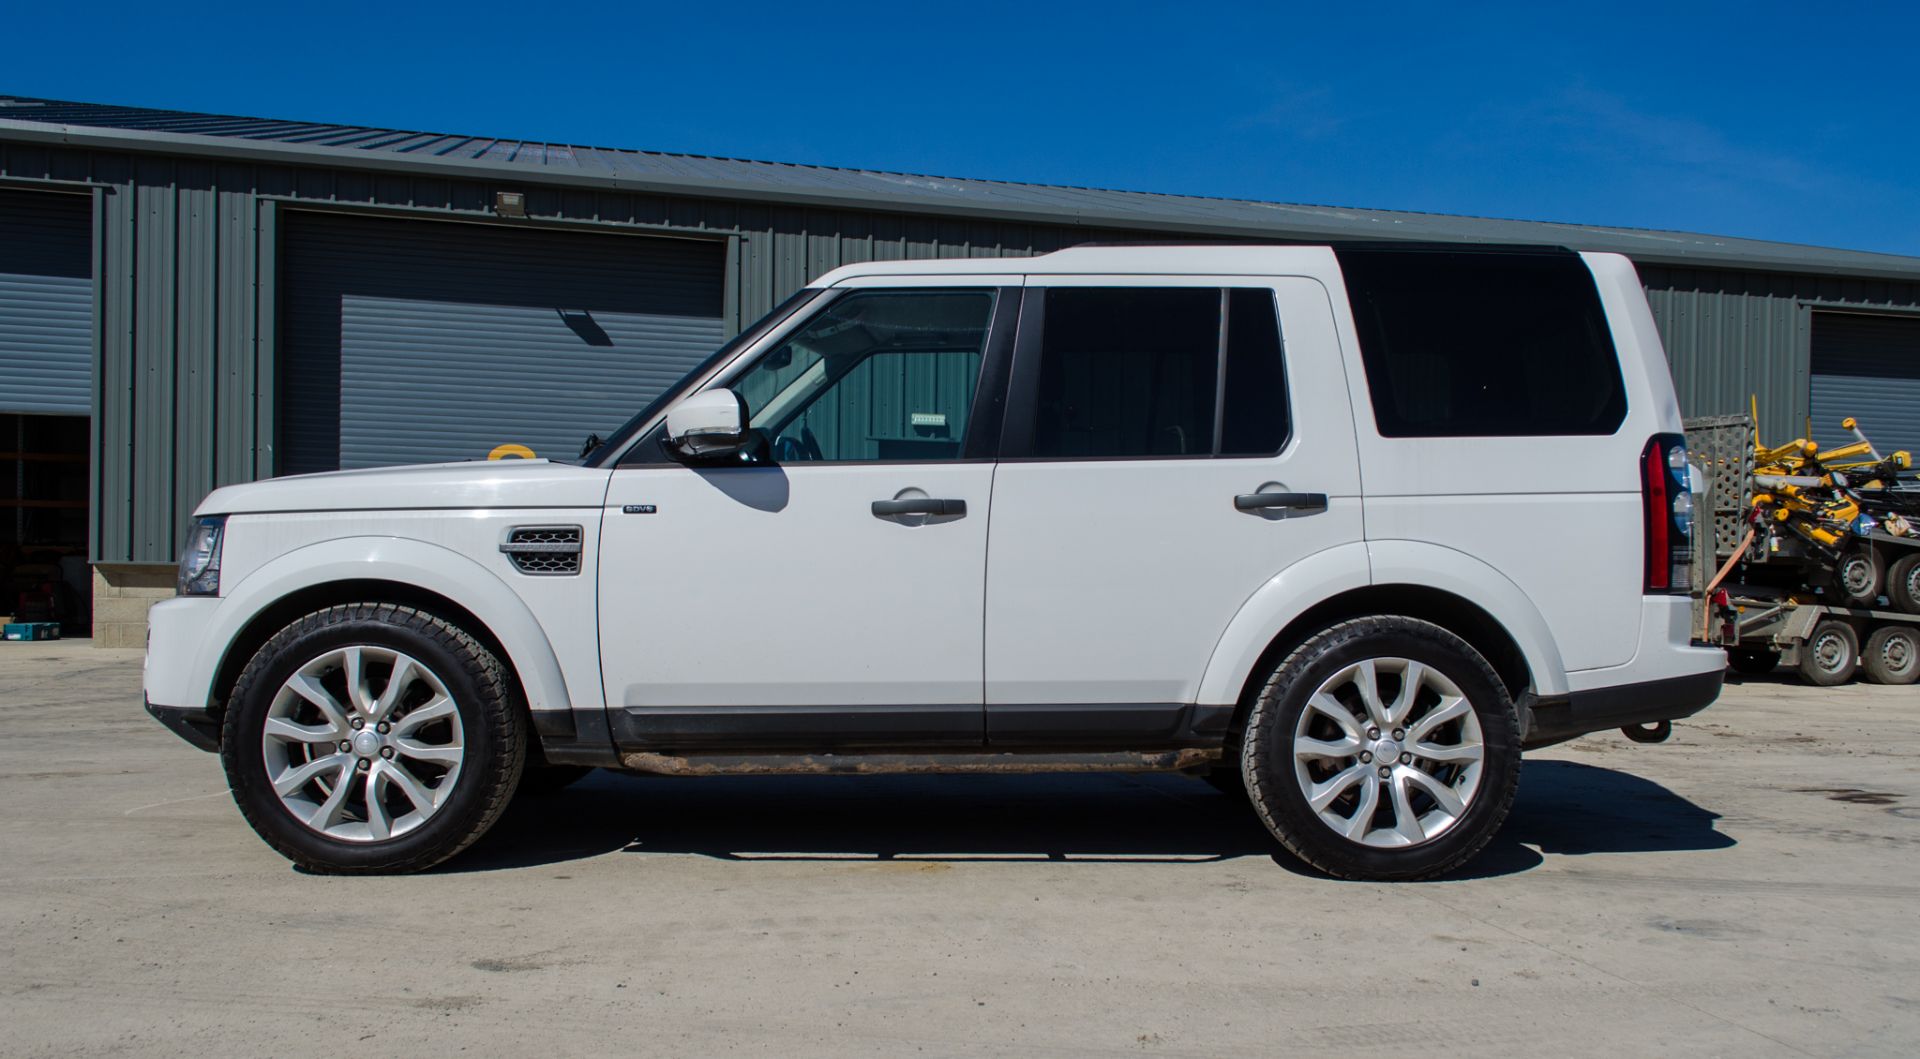 Land Rover Discovery 4 3.0 SE SDV6 Commercial 4x4 utility vehicle Reg No: PL65 SVR Date of - Image 7 of 32